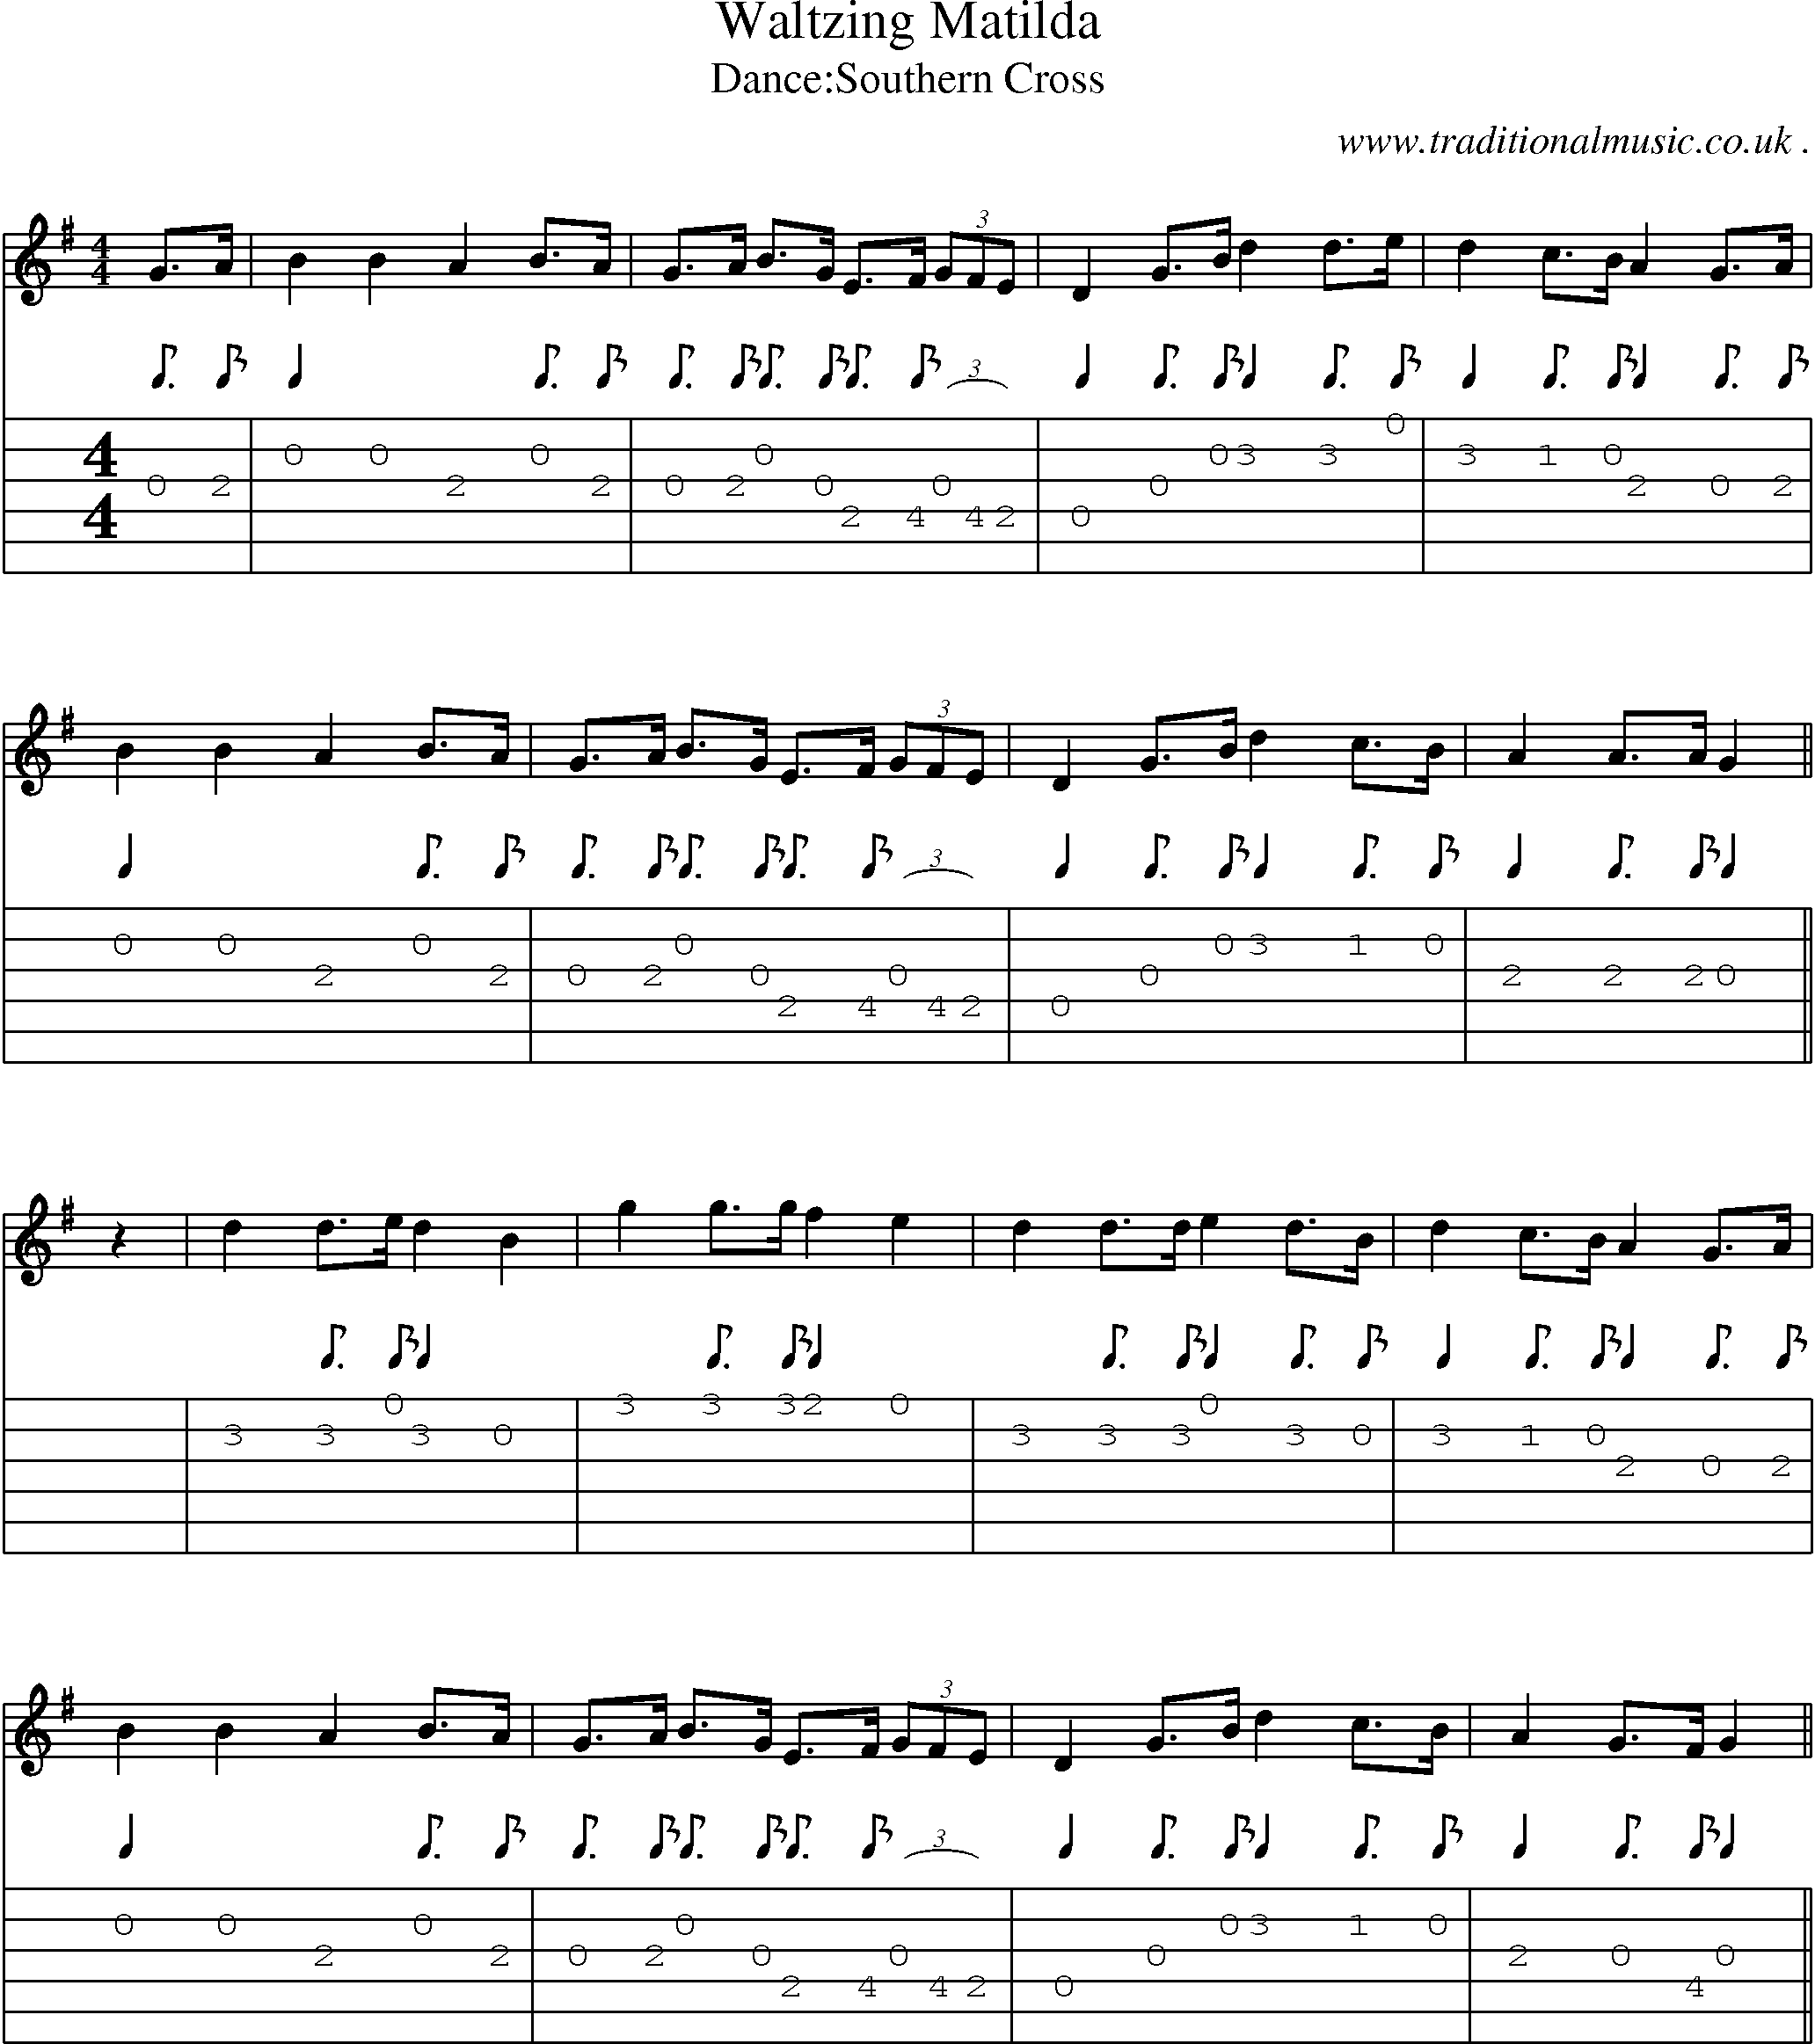 Sheet-Music and Guitar Tabs for Waltzing Matilda